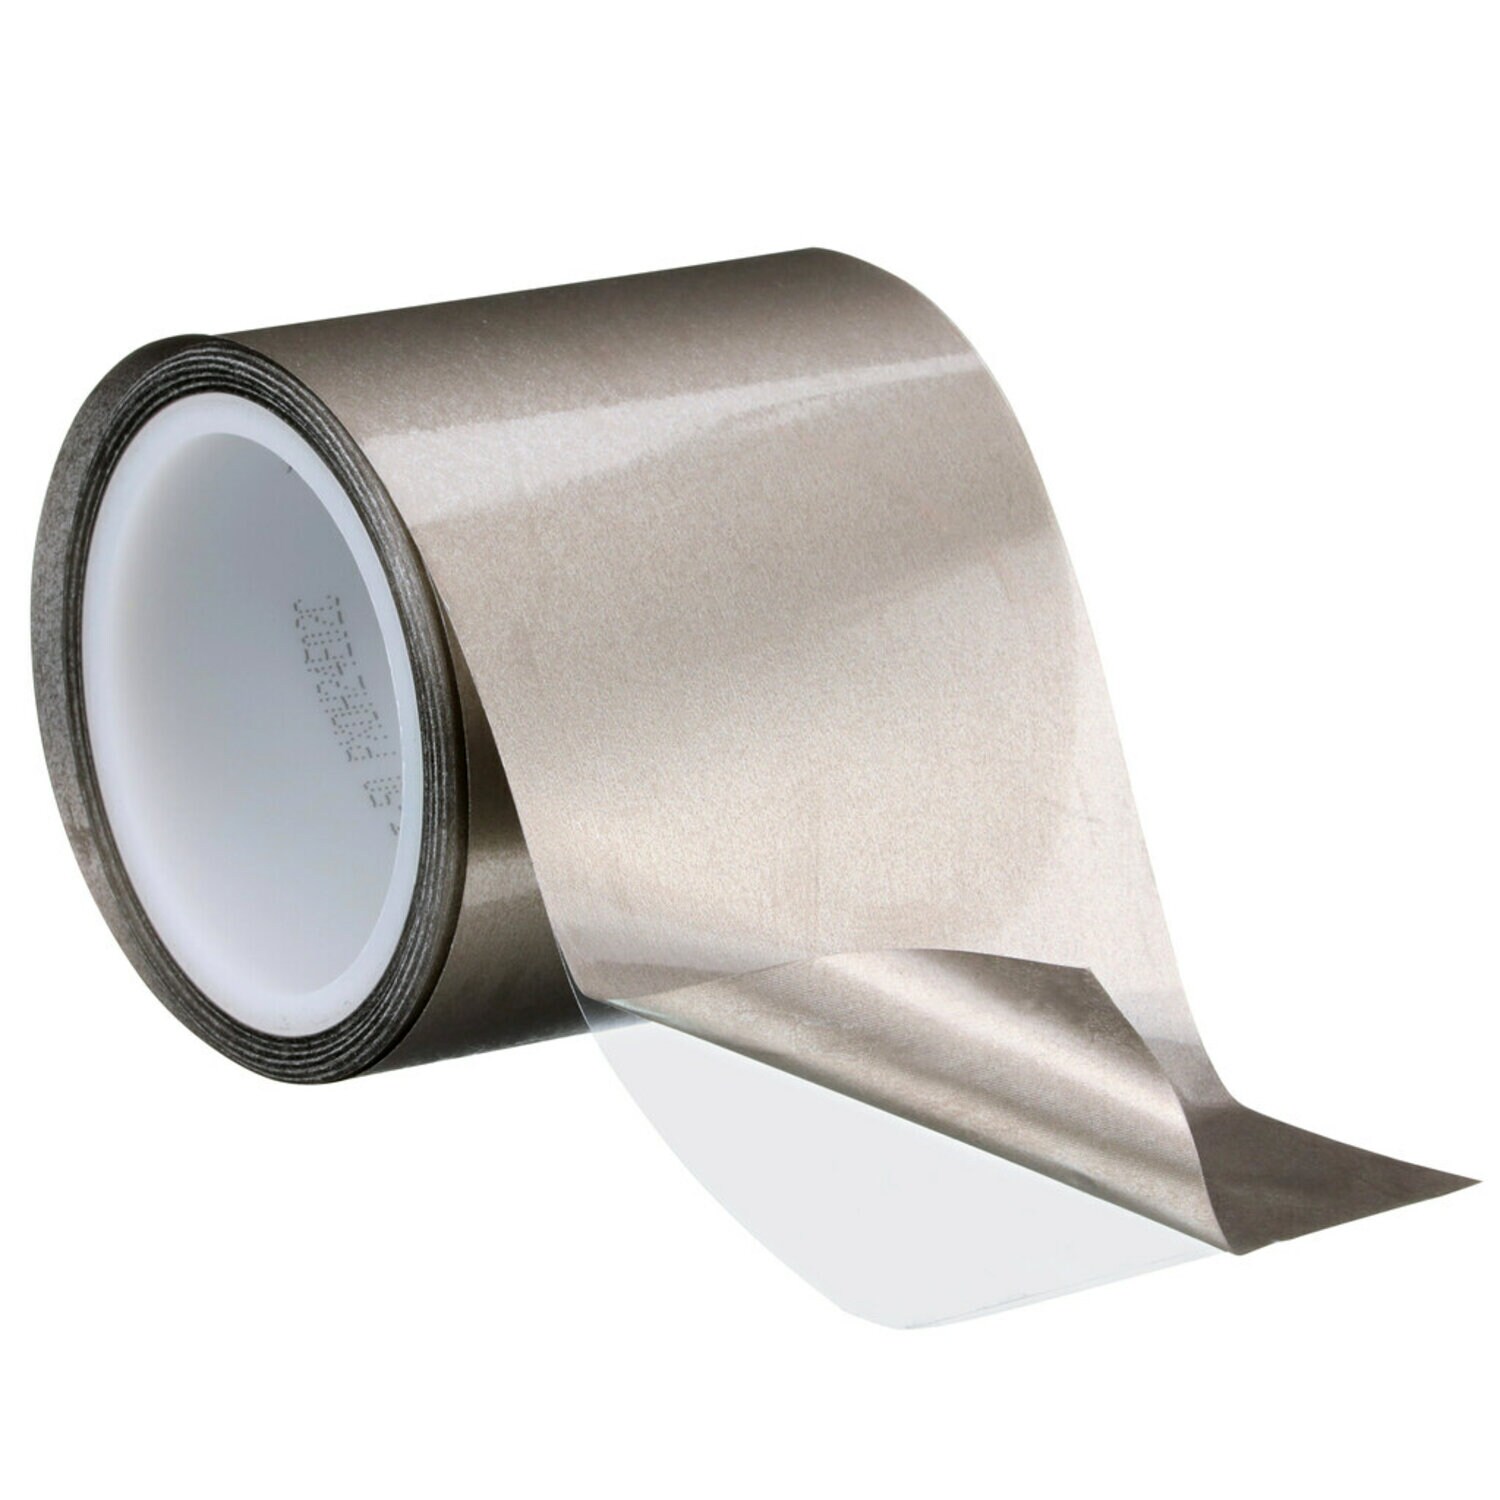 7100313596 - 3M Electrically Conductive Double-Sided Tape 5113DFT-50, Grey, 105 mm x 10 m, 8 Rolls/Case